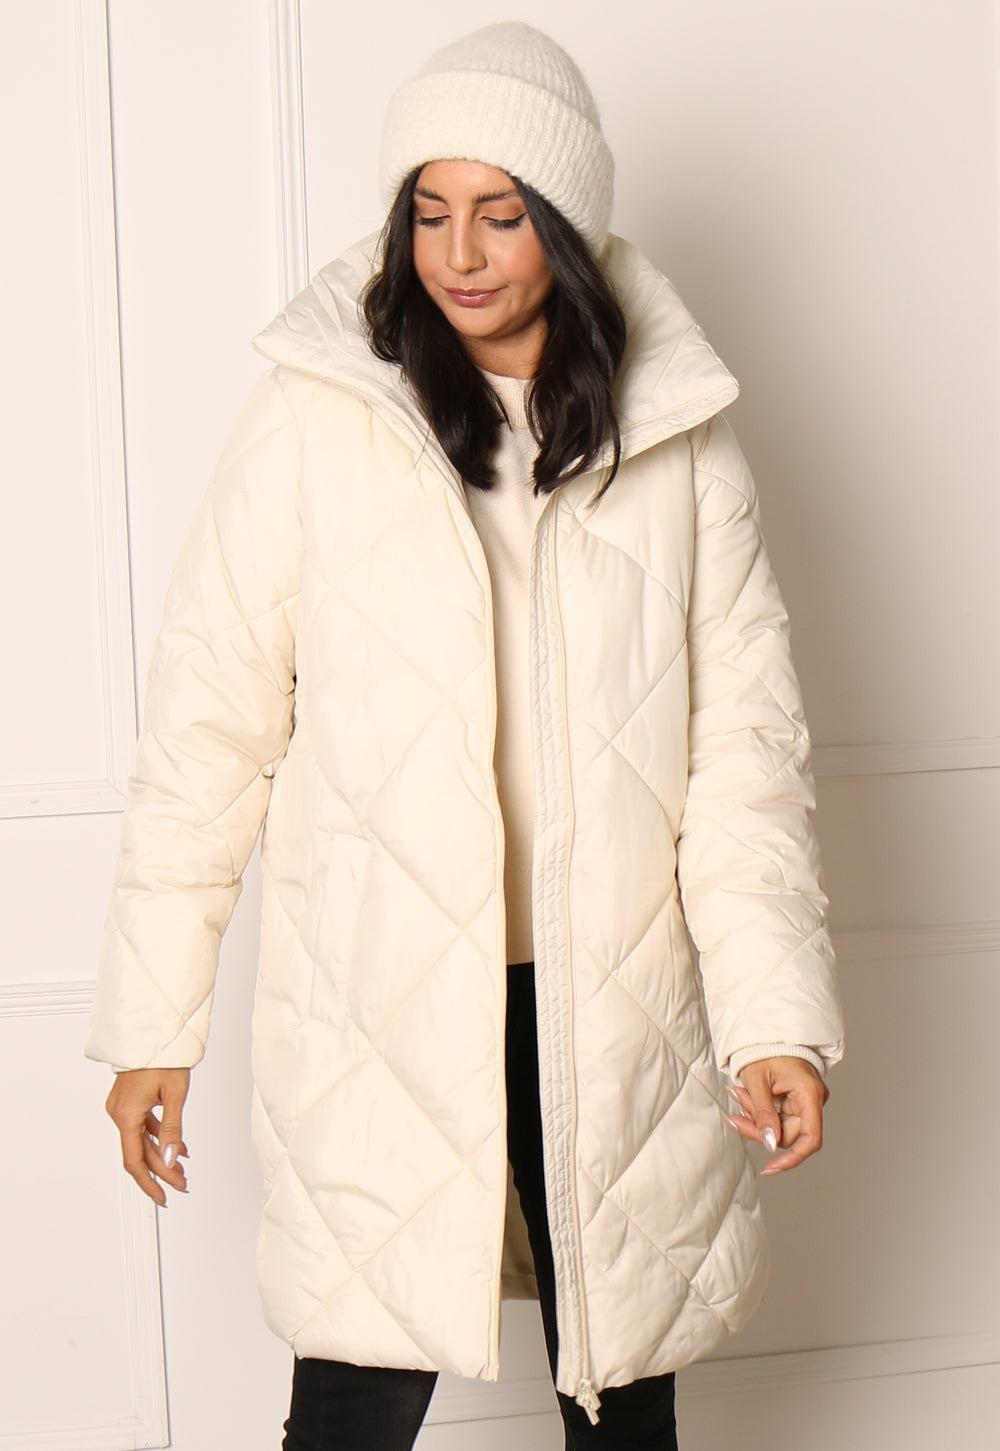 VILA Adaya Diamond Quilted Longline Puffer Coat with Funnel Neck in Soft Cream - One Nation Clothing